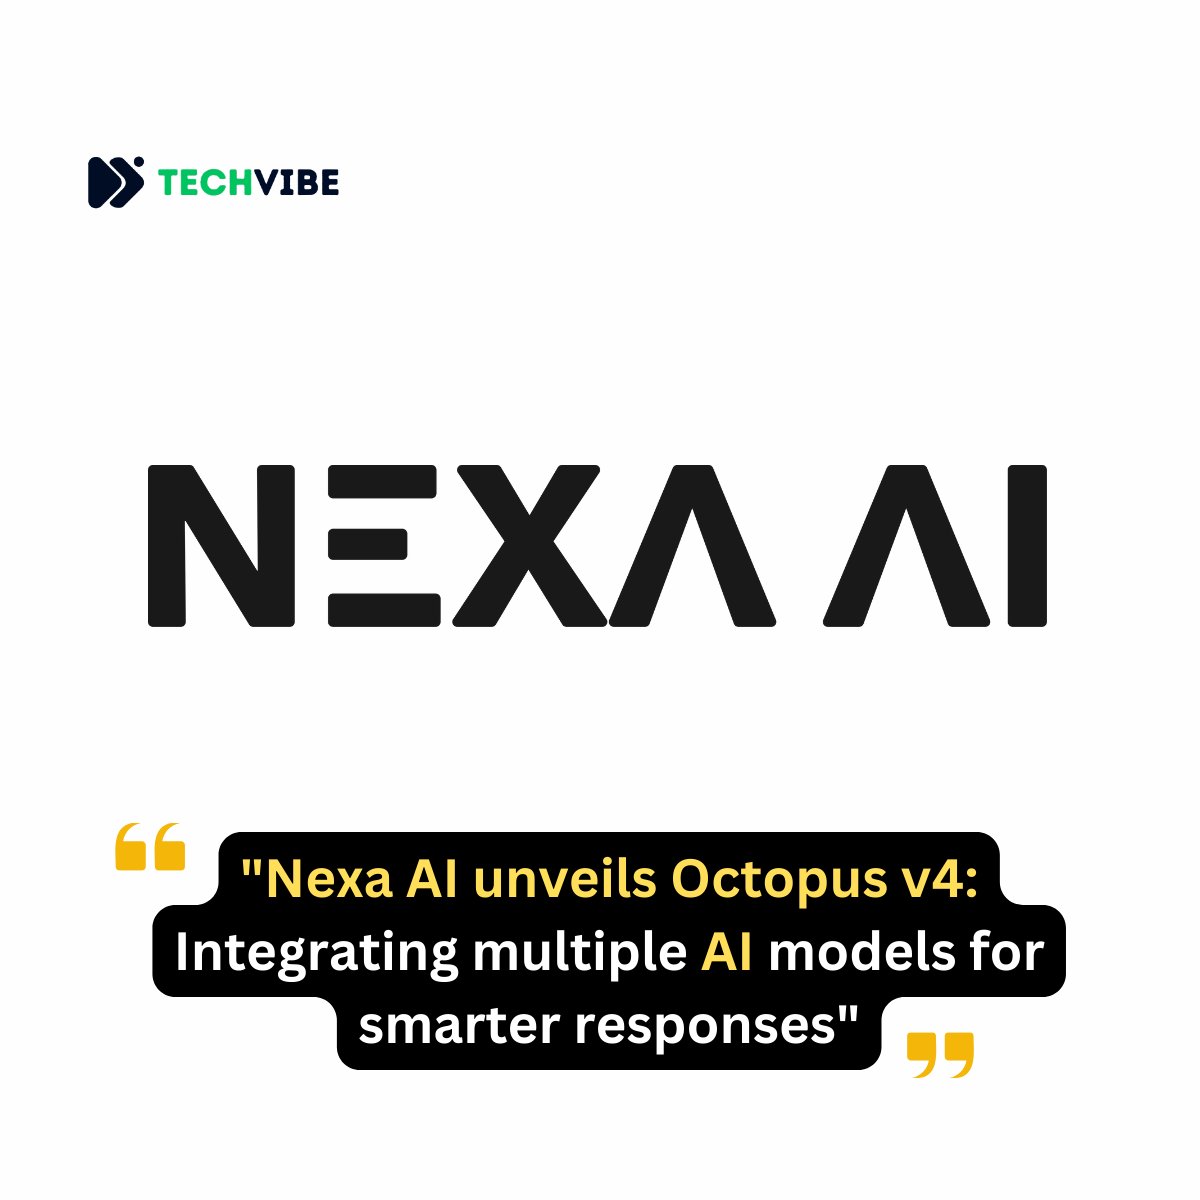 Nexa AI introduces Octopus v4, a cutting-edge approach employing functional tokens to seamlessly integrate various open-source AI models, optimizing performance and enhancing response quality. more: t.ly/7Ysrk #NexaAI #AI #Octopus4 #AInews